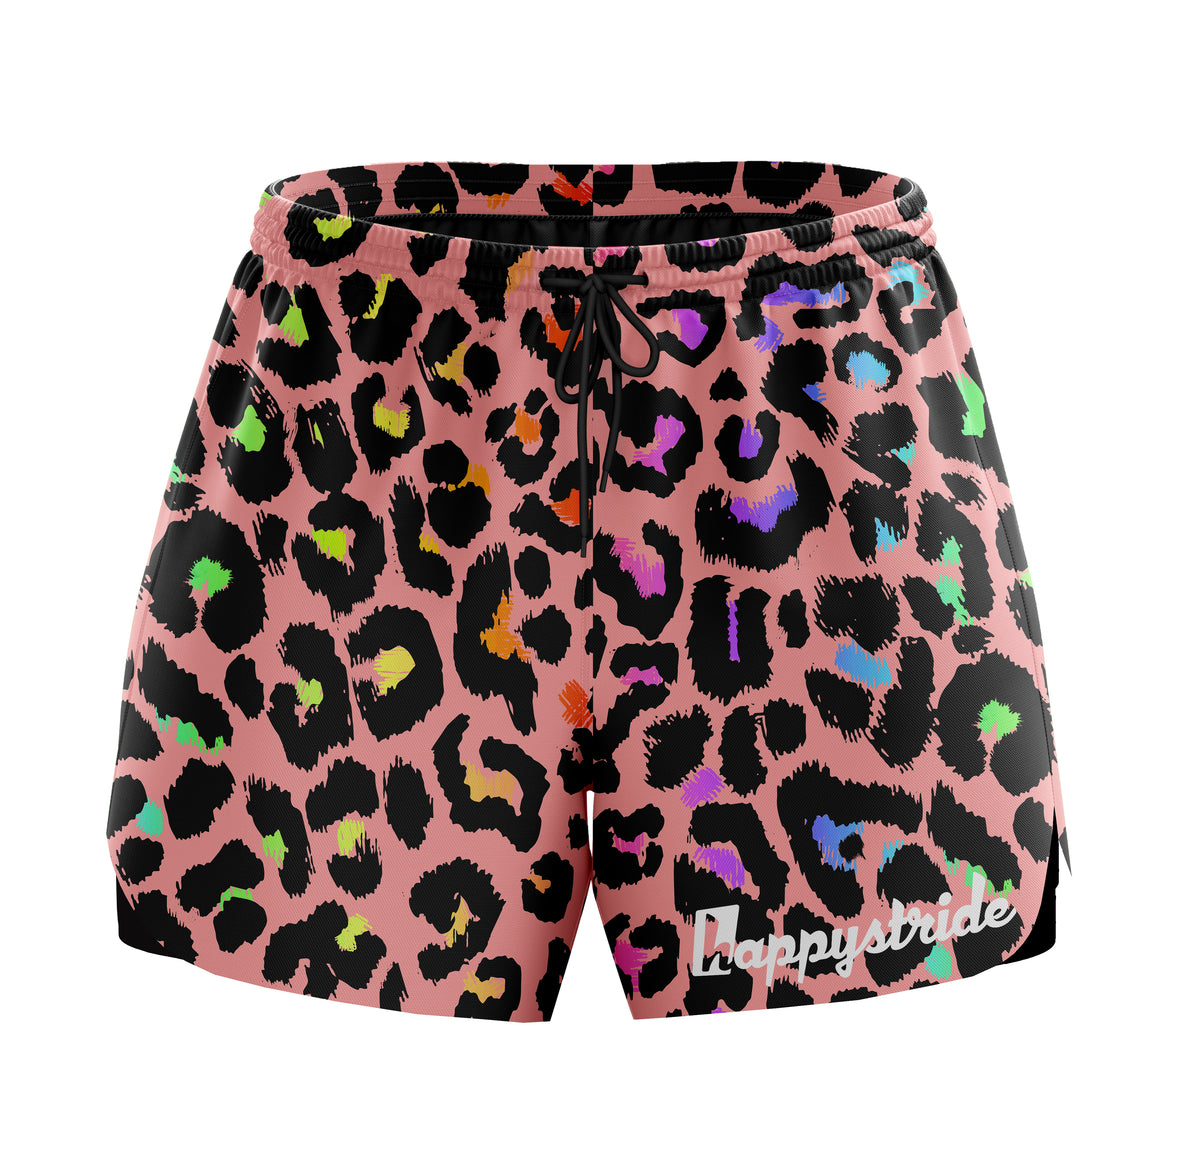 Get spotted'' saucy leopard print cool colourful fun bright unisex 2-in-1  running & fitness shorts – Happystride